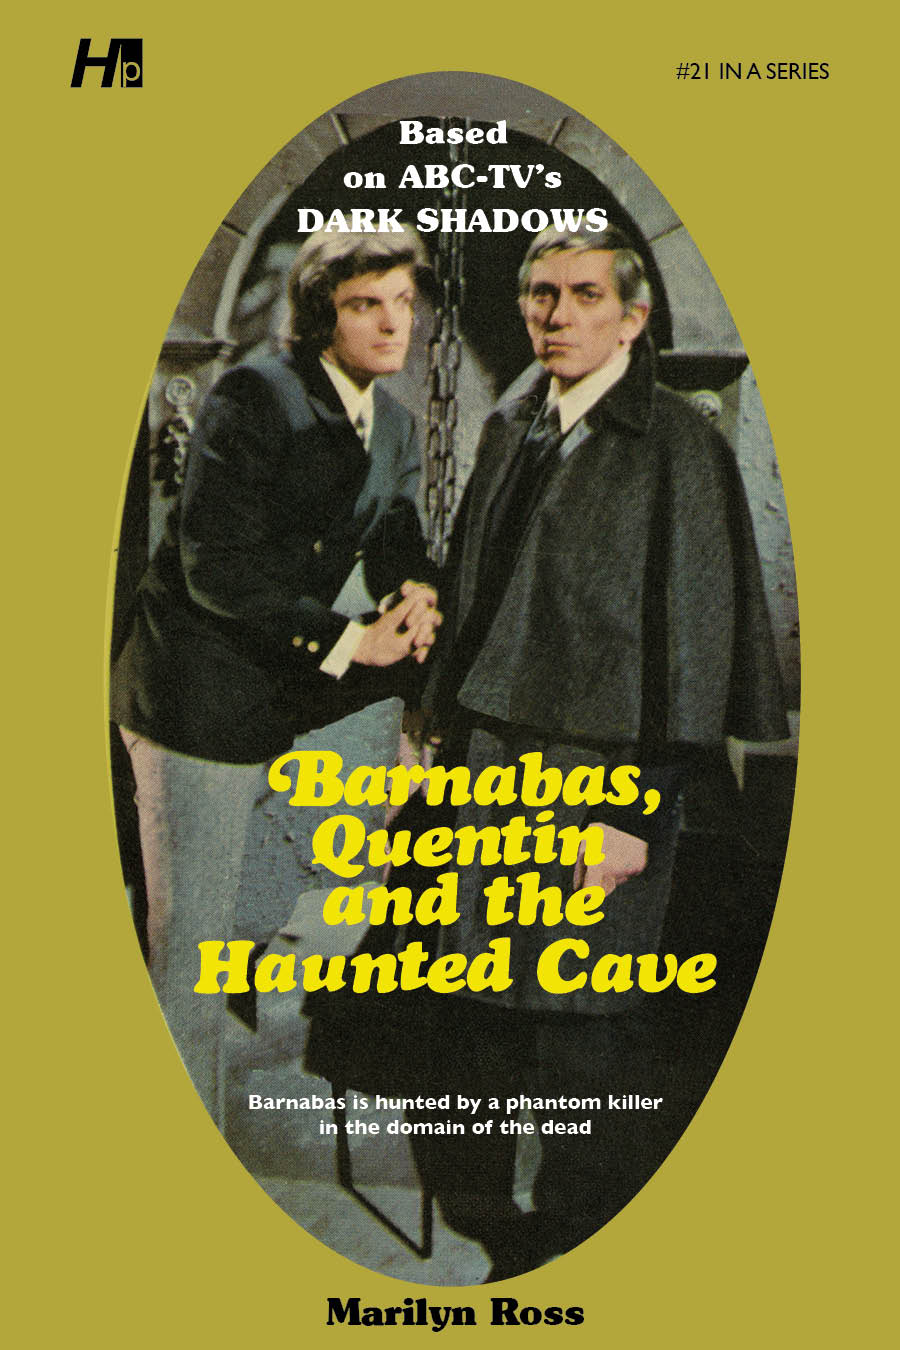 Dark Shadows #21: Barnabas, Quentin and the Haunted Cave [Paperback]